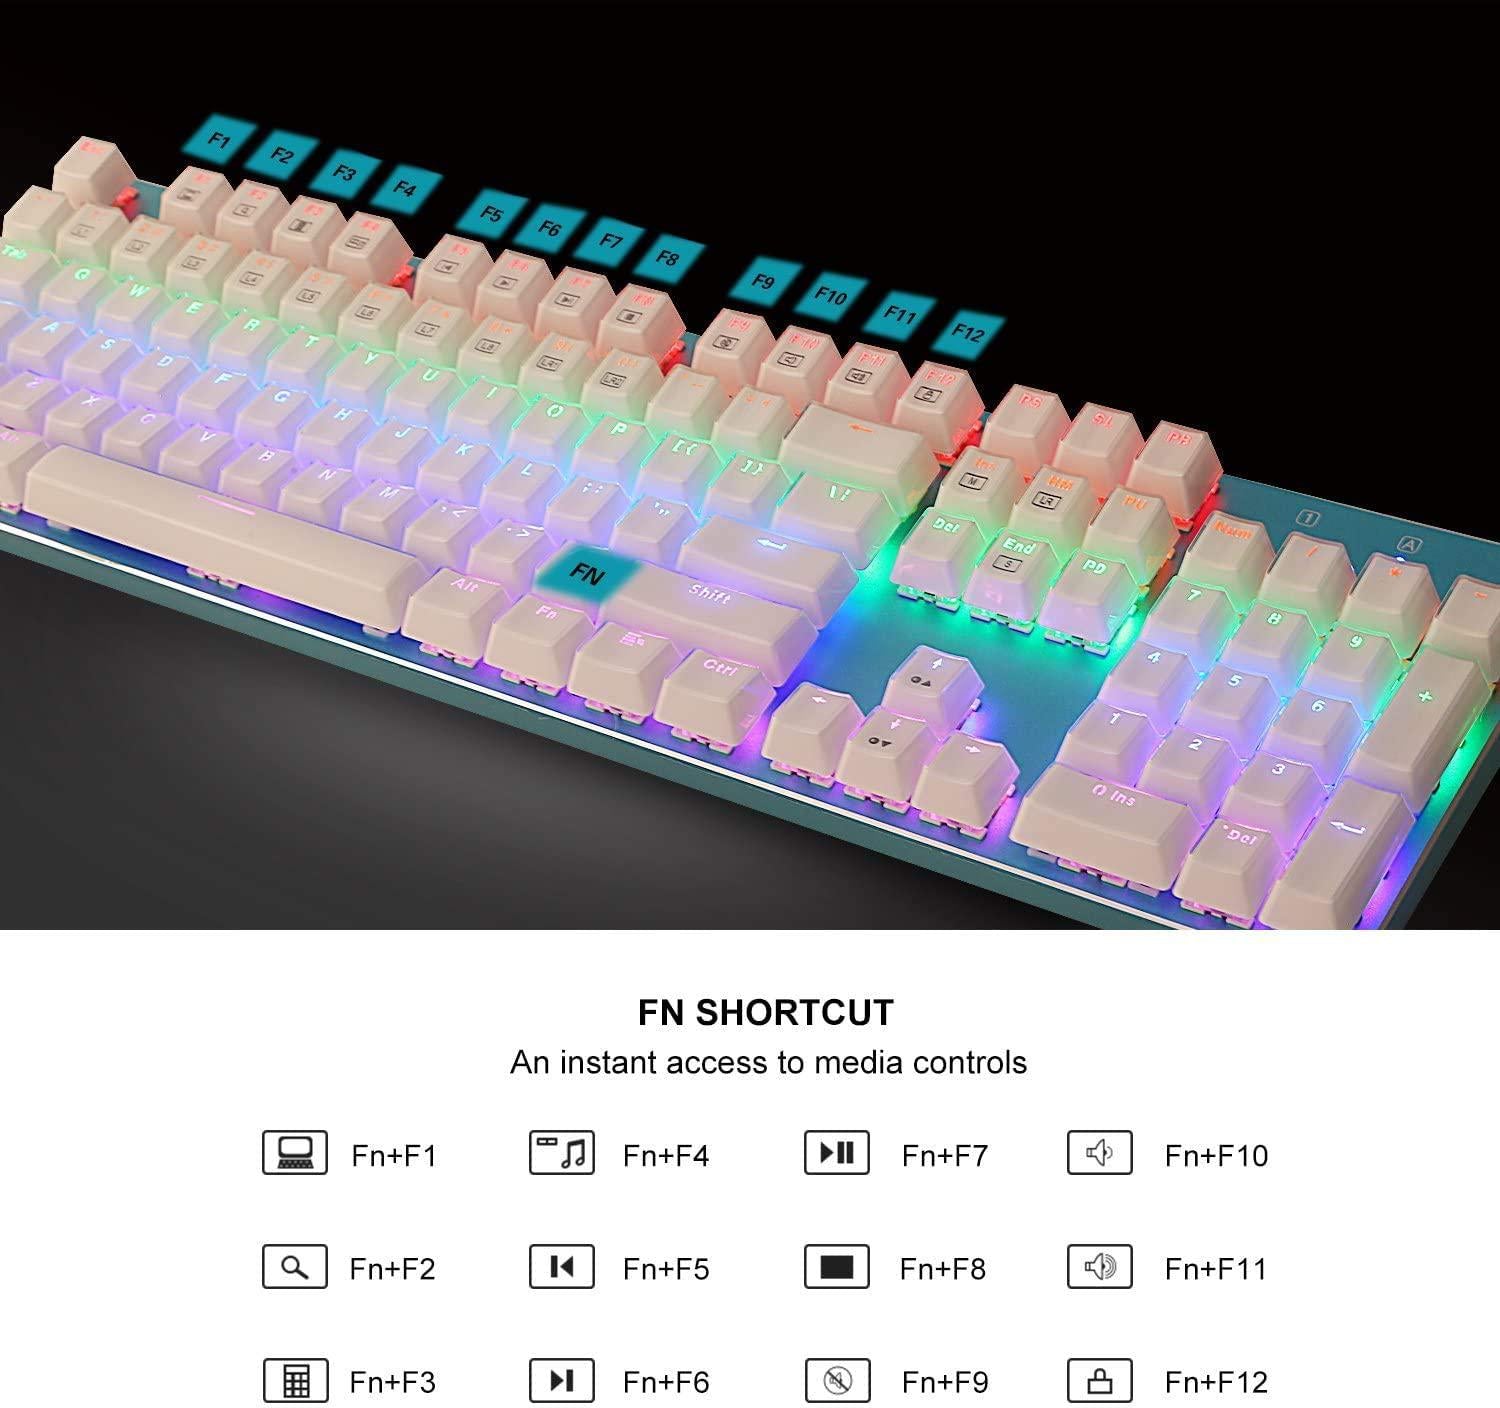 E Element, Mechanical Gaming Keyboard Blue Switches, Rainbow Backlit, 104 Keys Anti-Ghosting Keyboard for PC Computer Desktop (Blue White)